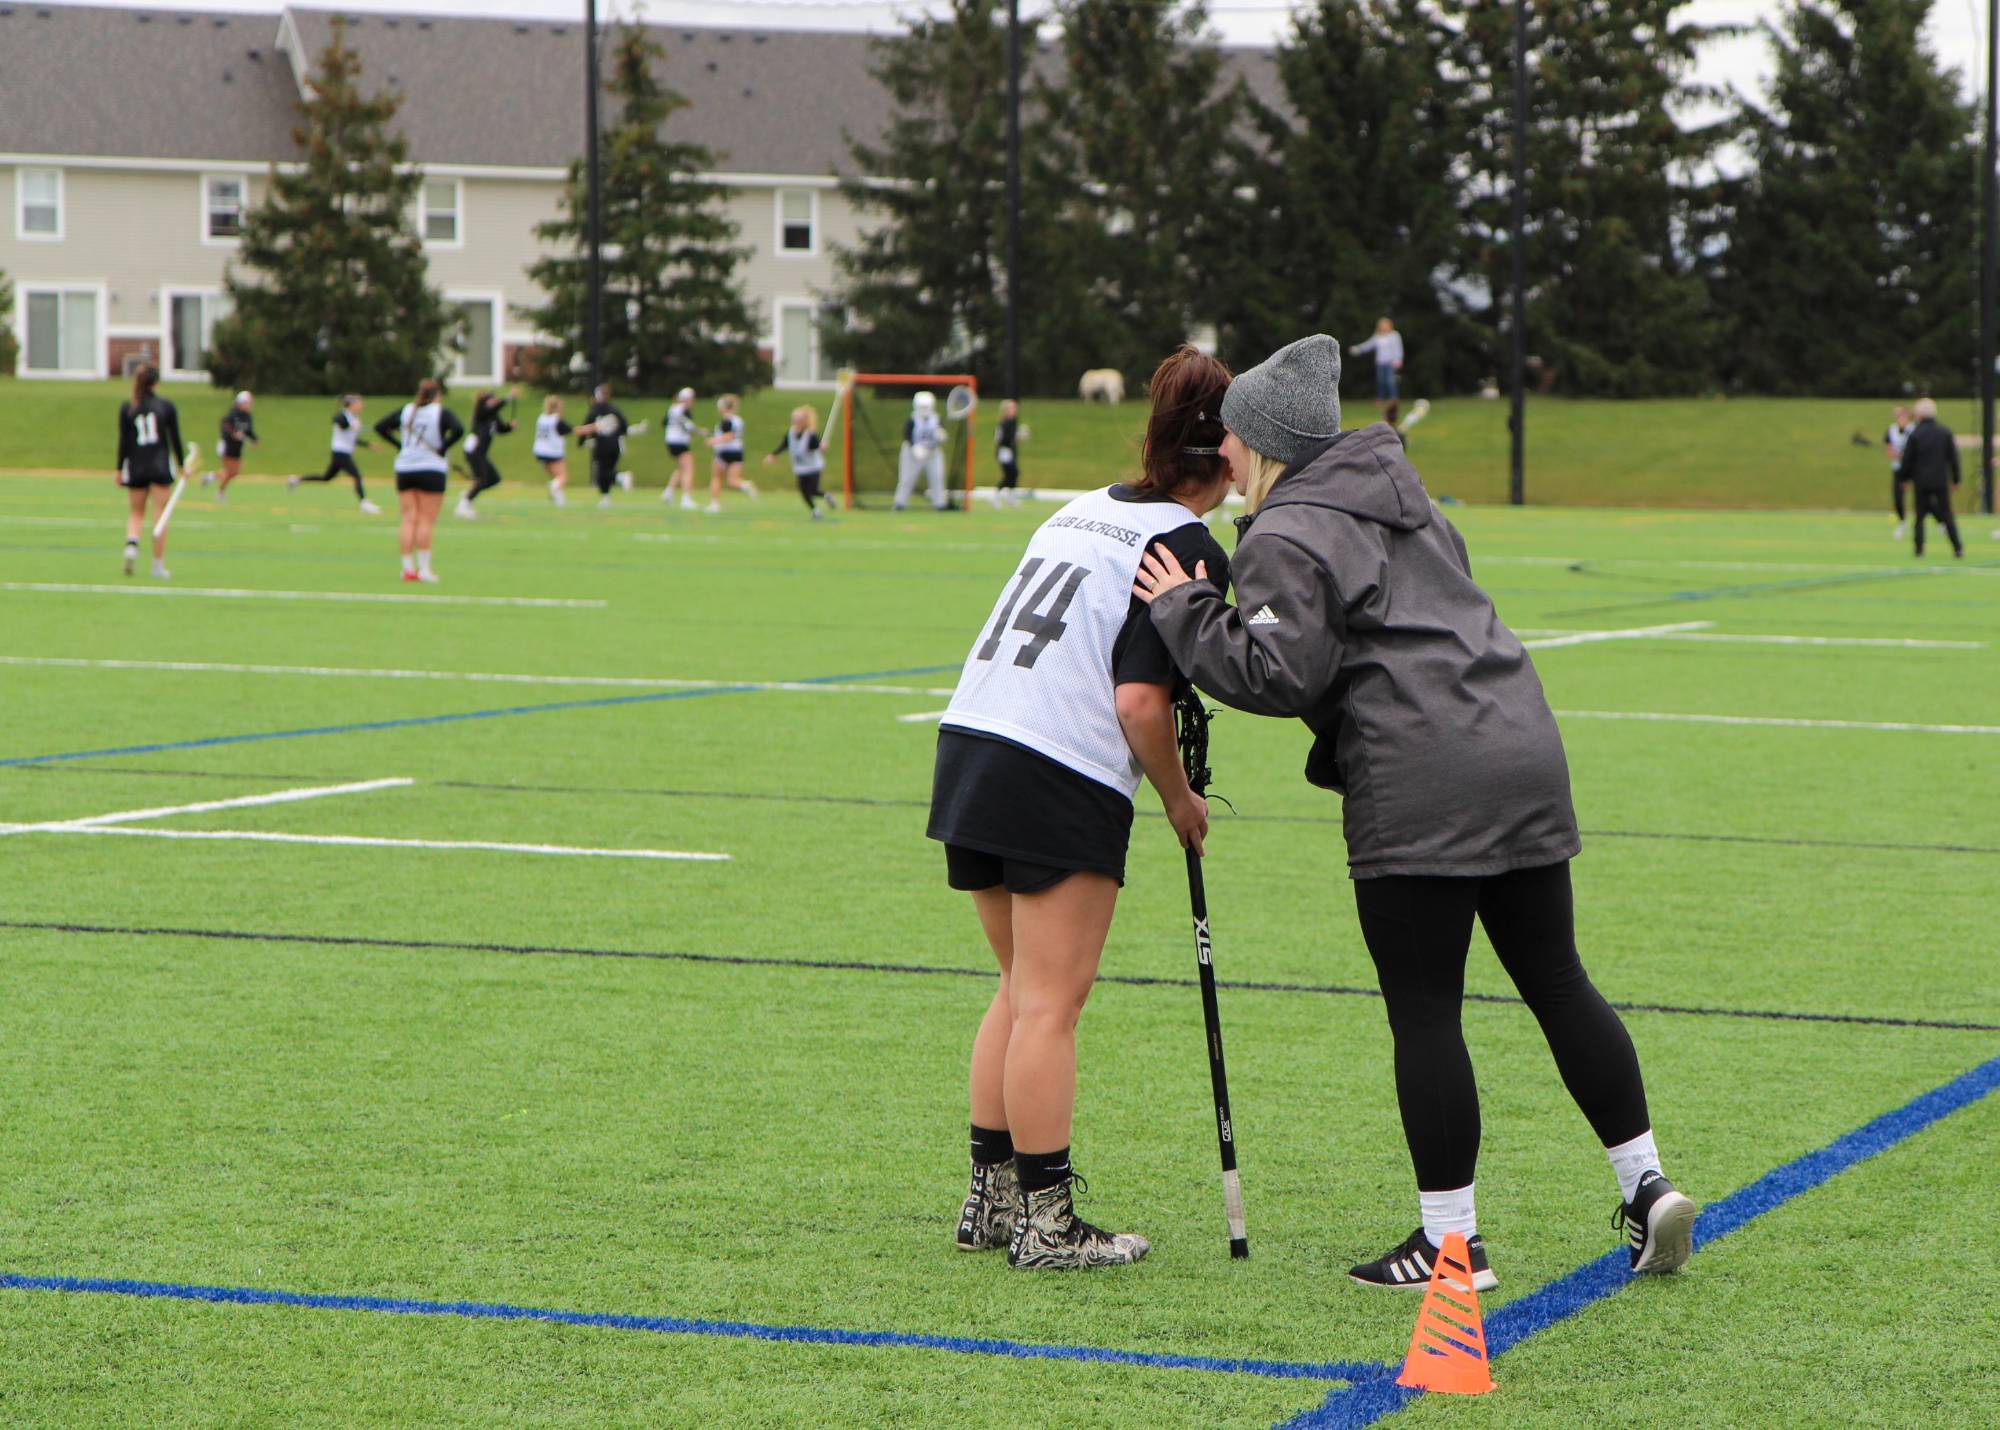 coach leaning in from the sideline to talk to a women's lacrosse player